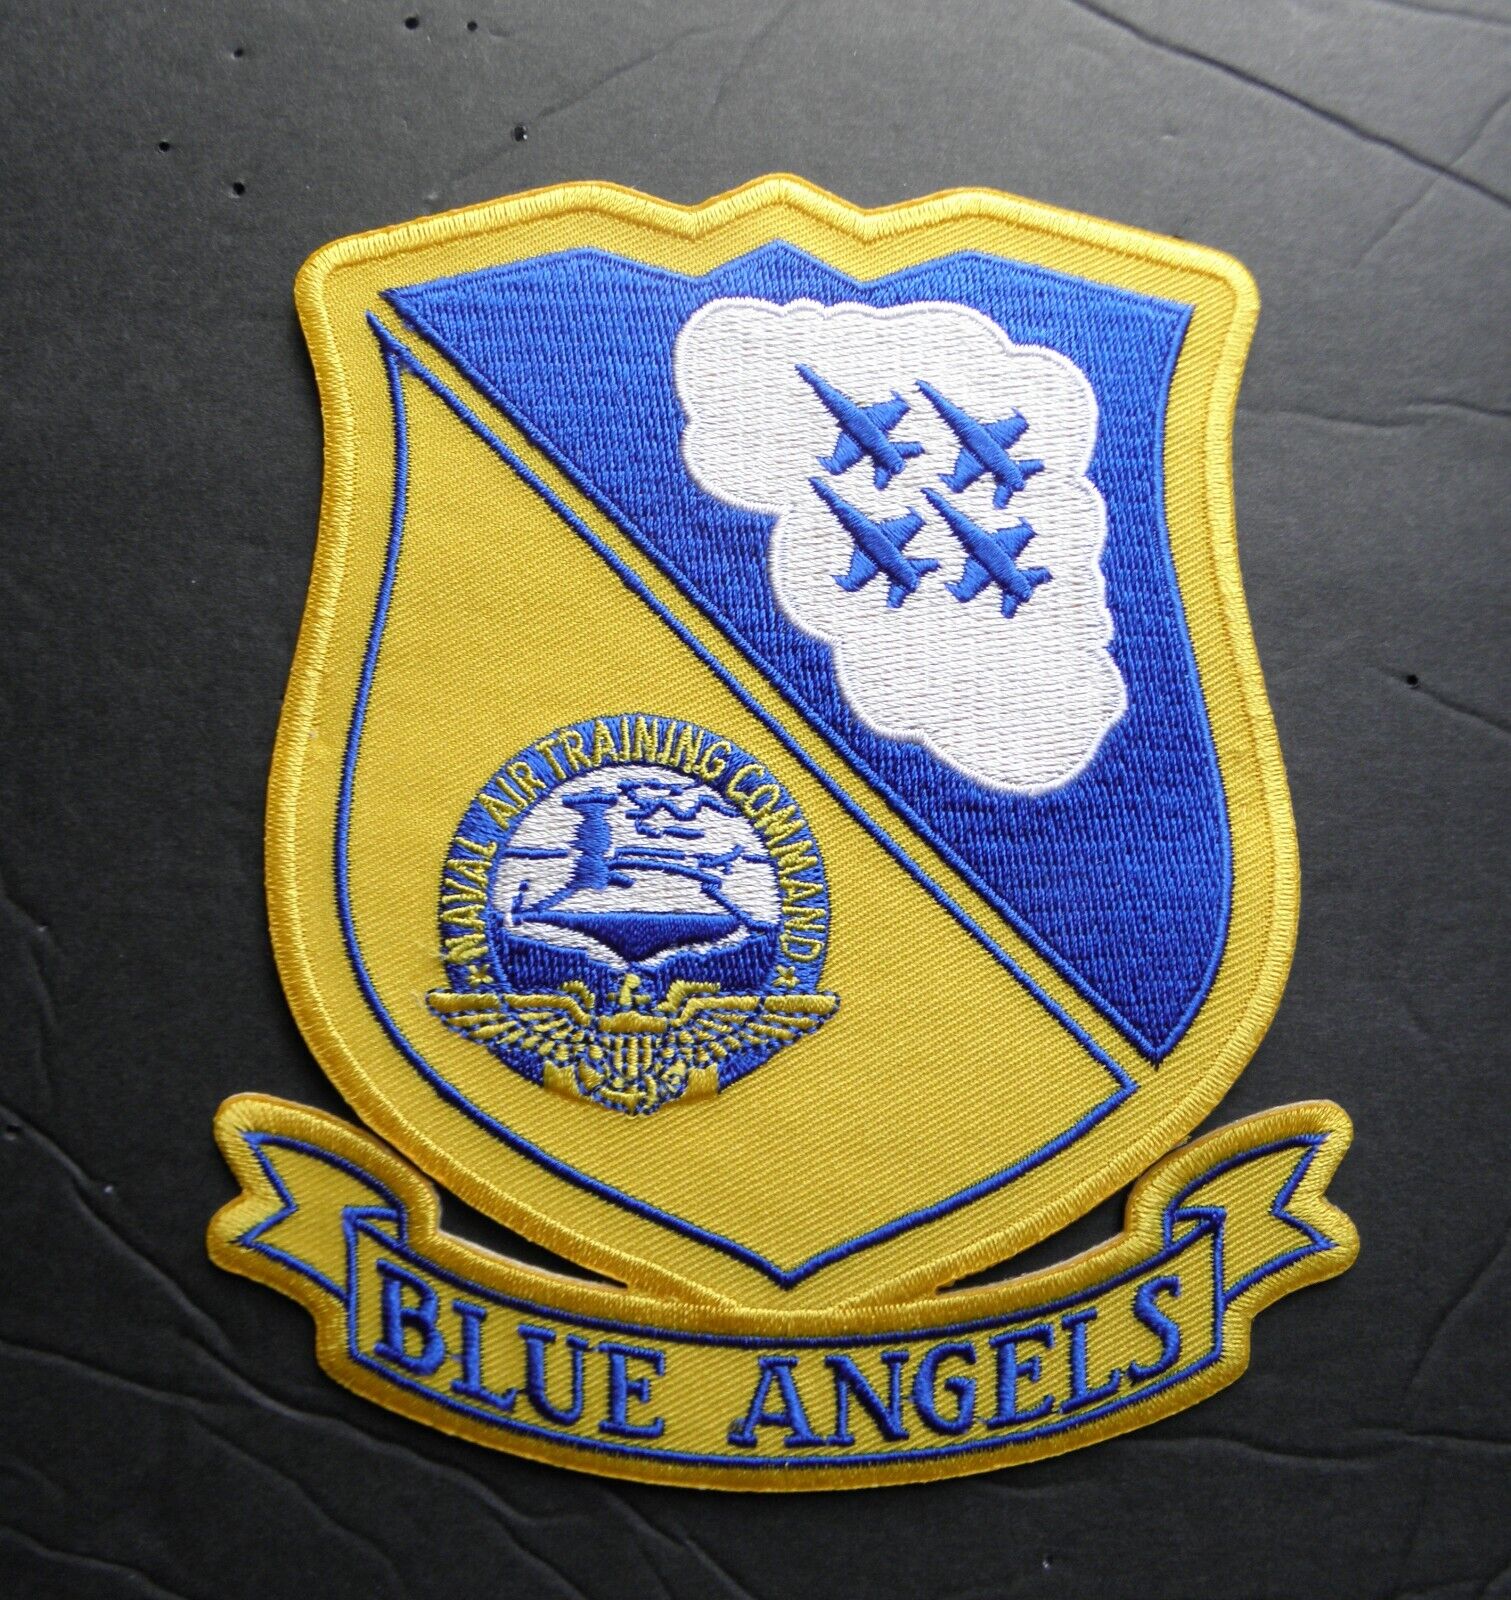 BLUE ANGELS NAVAL AIR TRAINING COMMAND NAVY USN EMBROIDERED PATCH 4.75 x 5.5